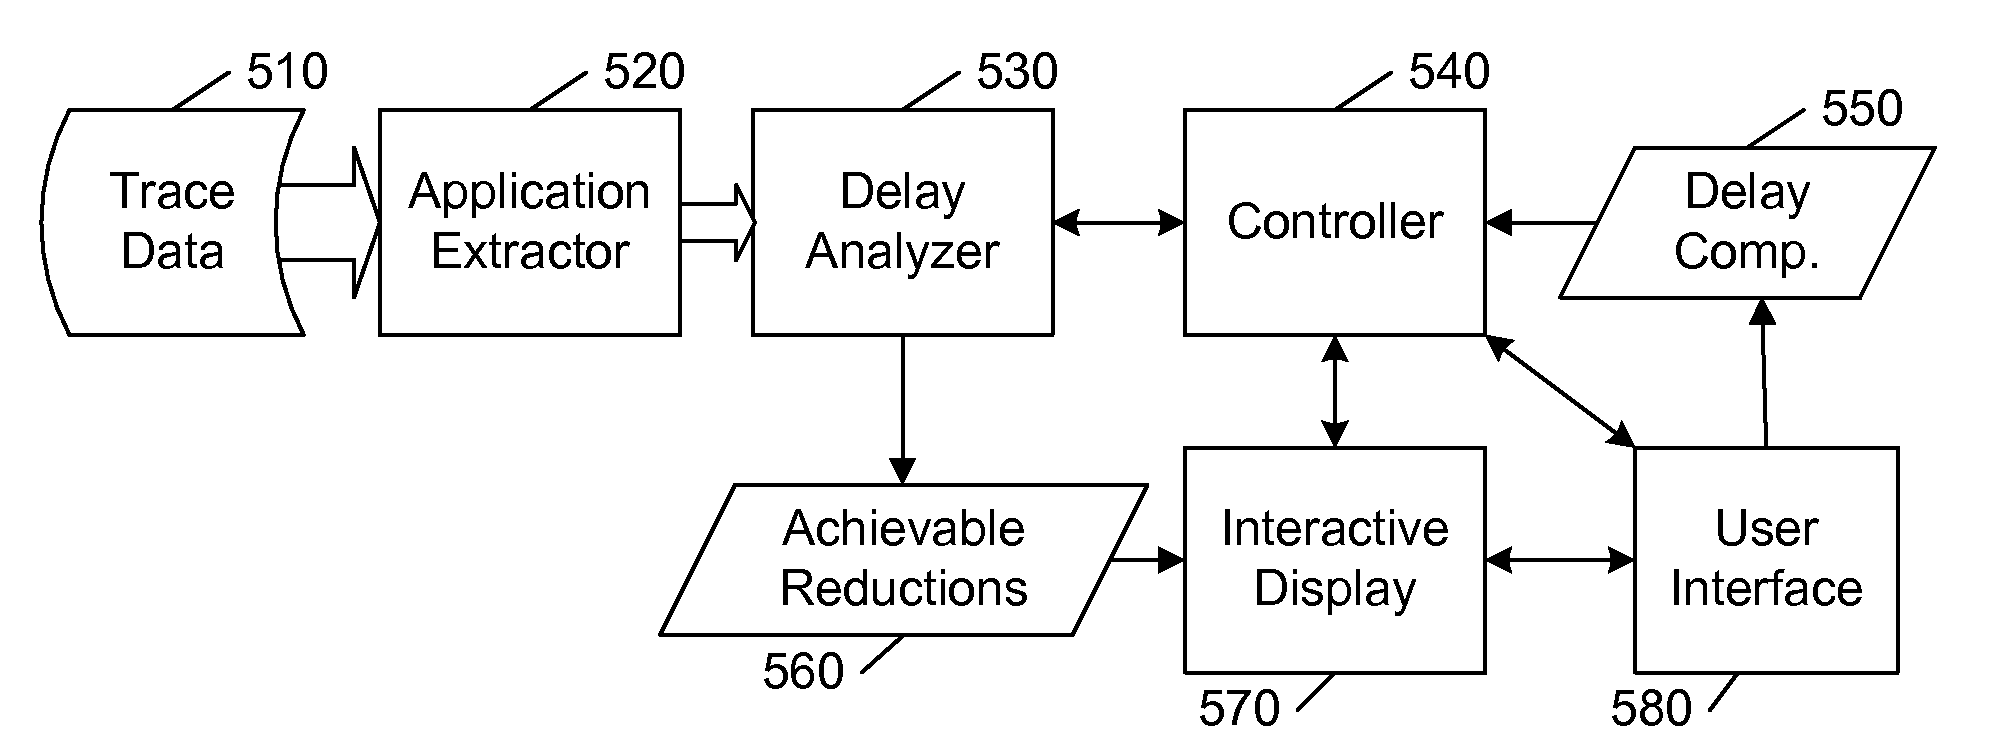 Network delay analysis including parallel delay effects